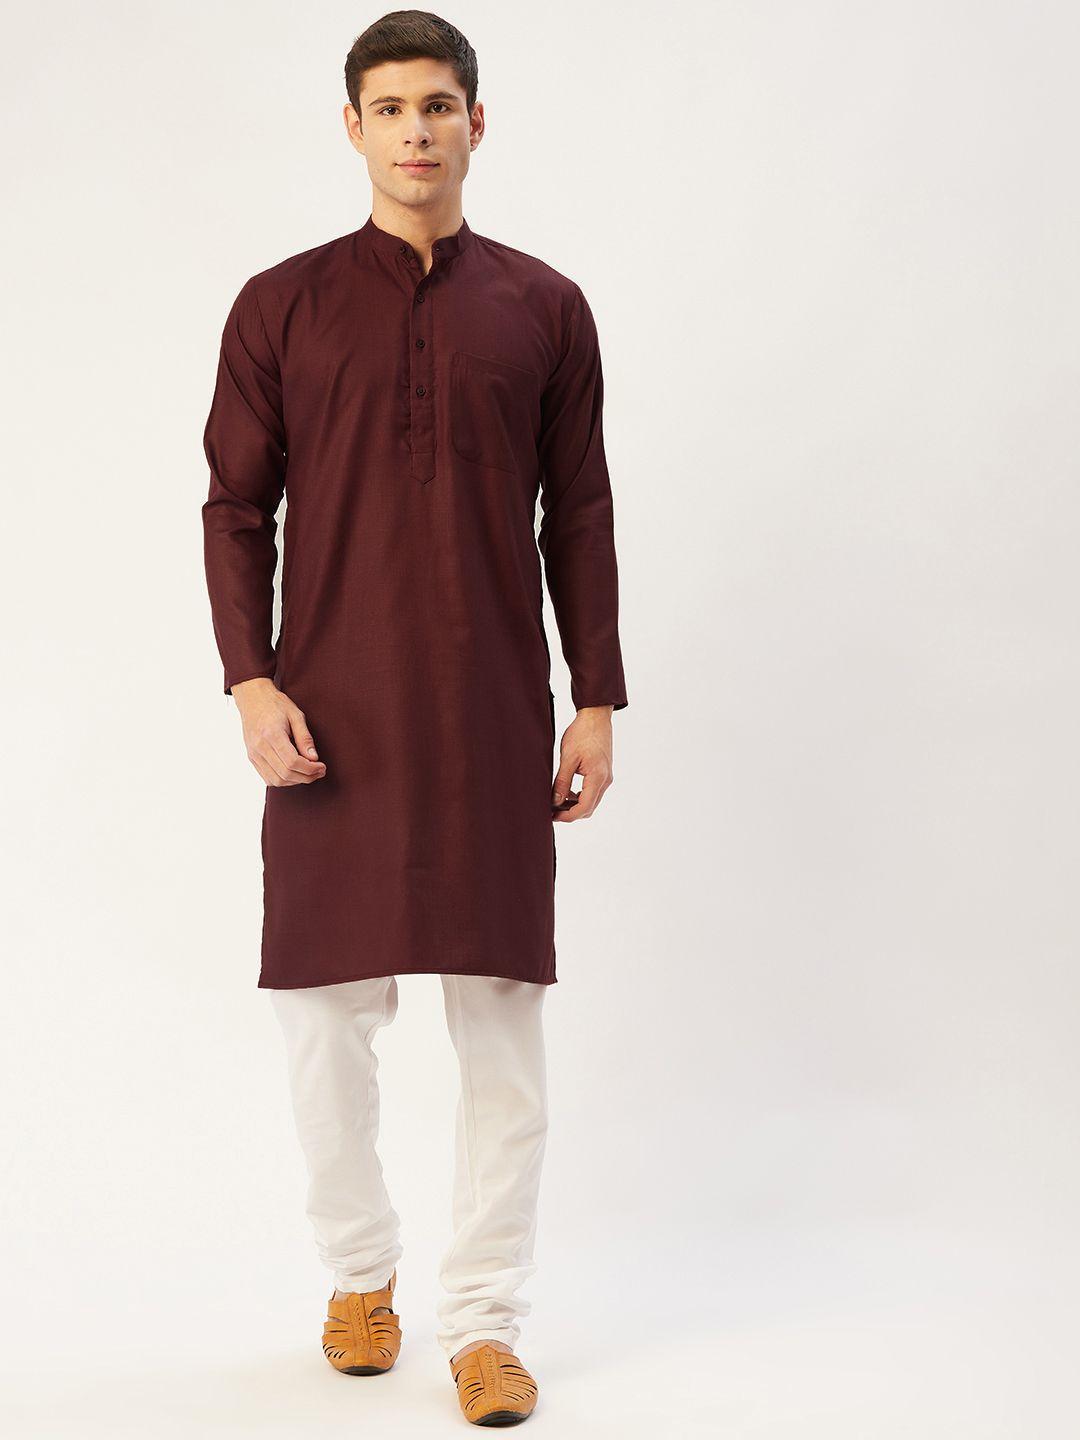 jompers men maroon & off-white solid pure cotton kurta with churidar